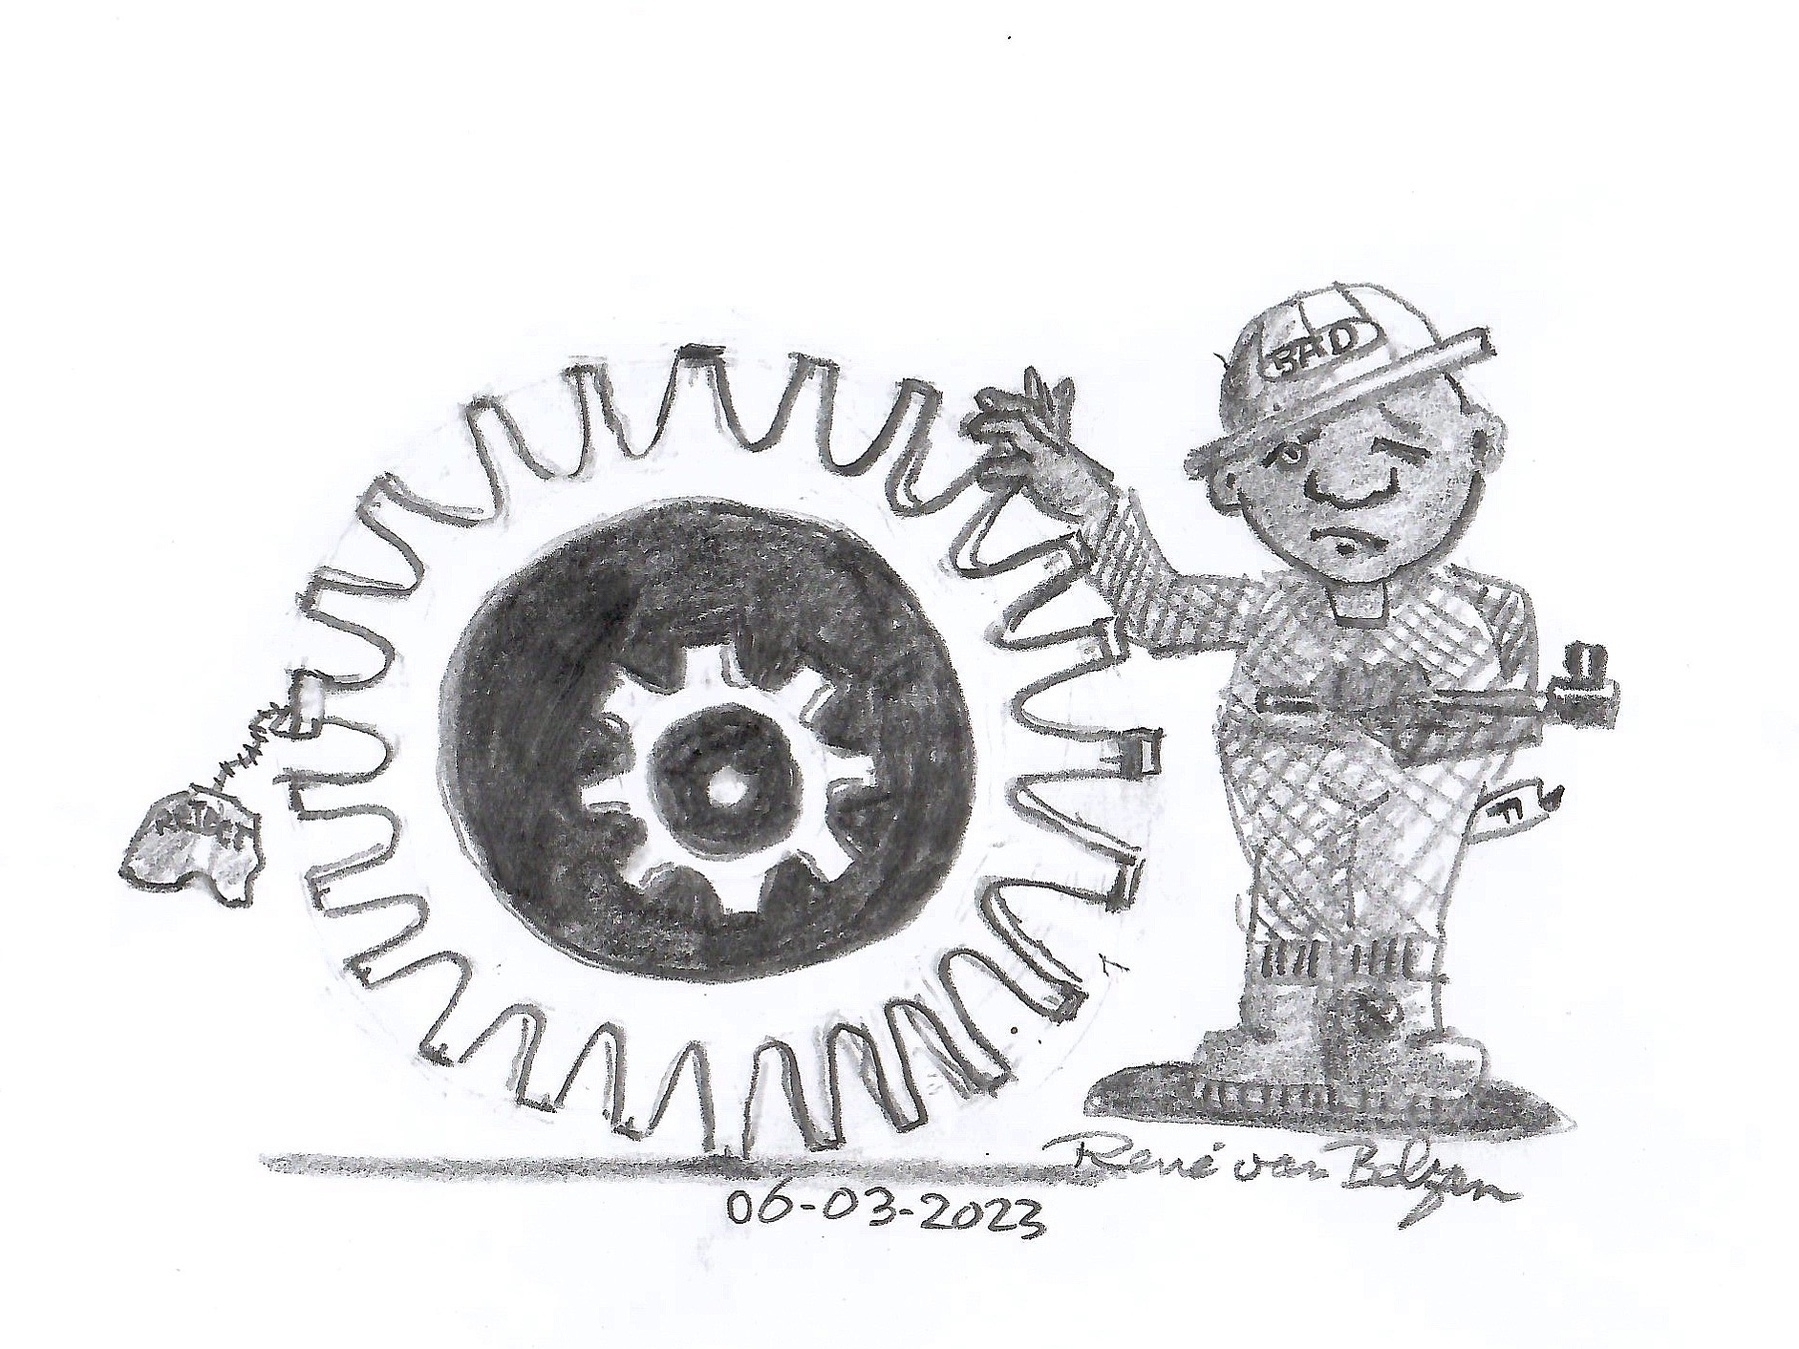 pencil drawing of a failed engineer showing a badly shaped gearwheel